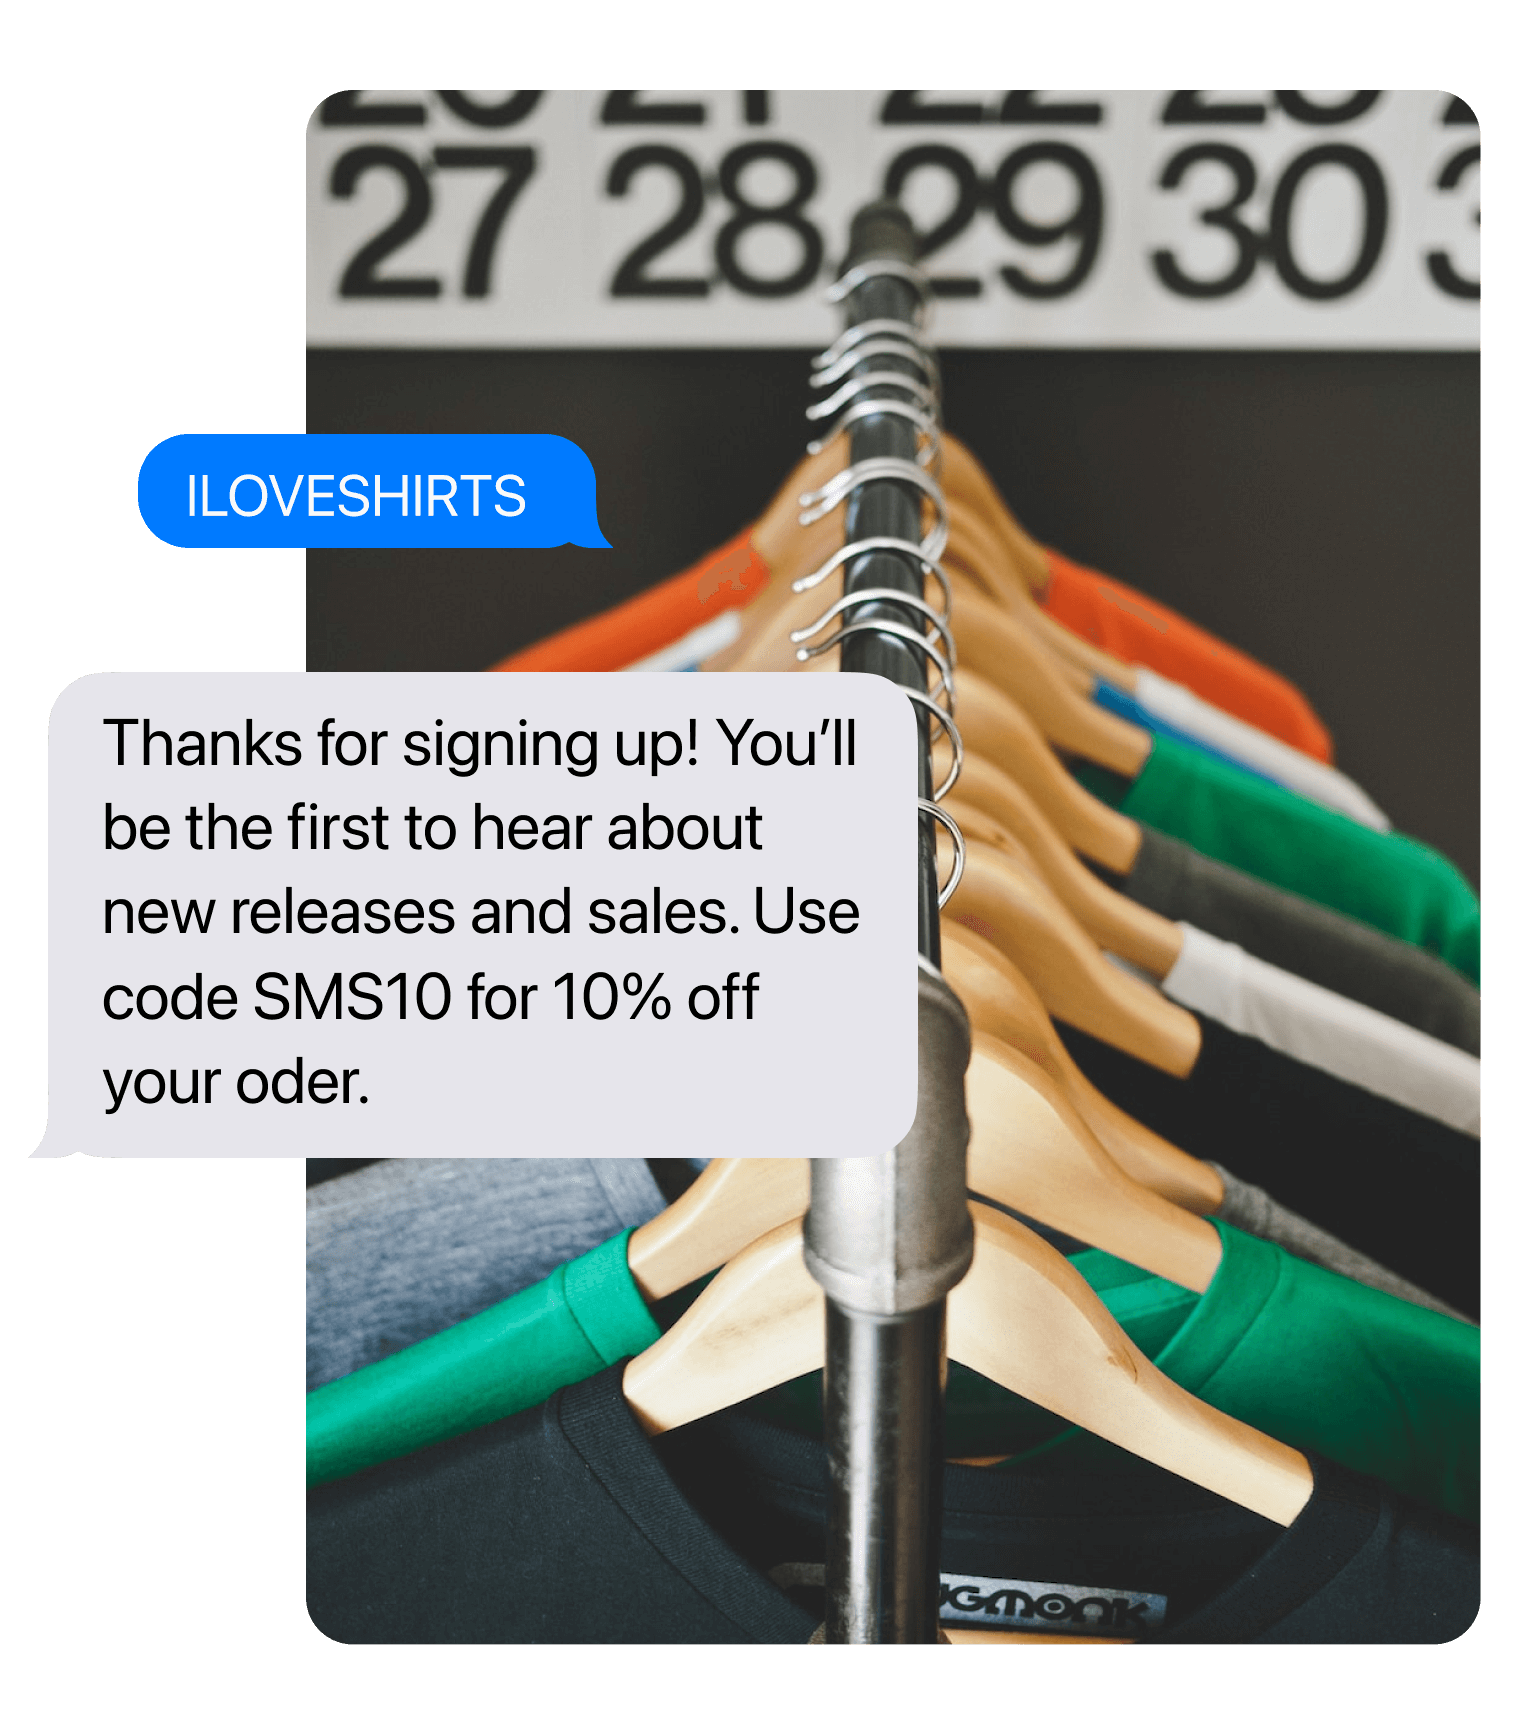 ecommerce SMS marketing campaign with a text-for-info keyword